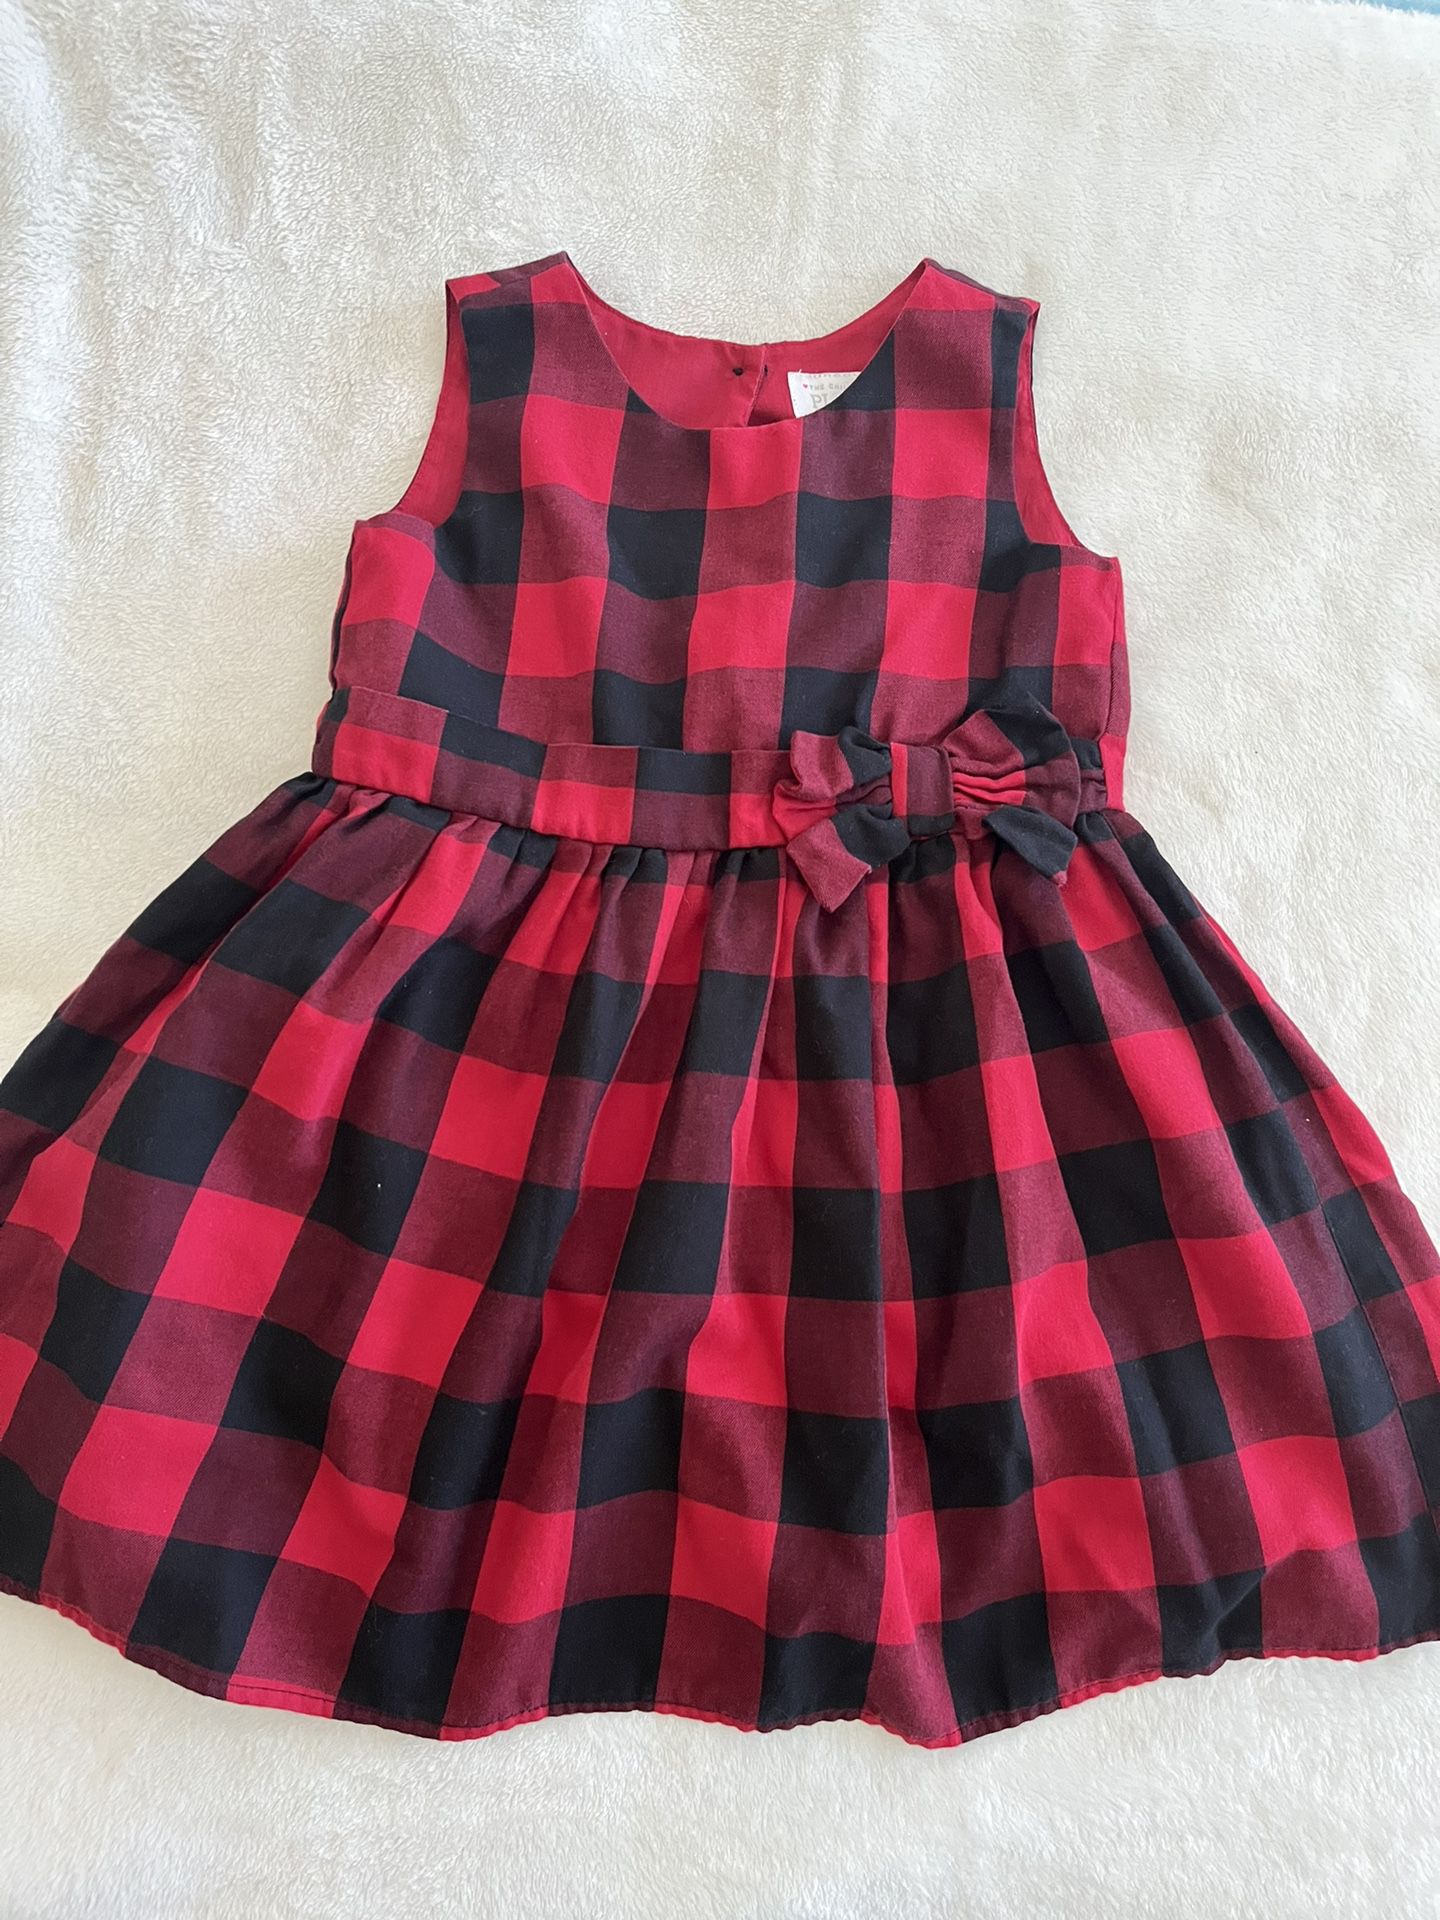 4-5 Year Toddler Girl Clothes